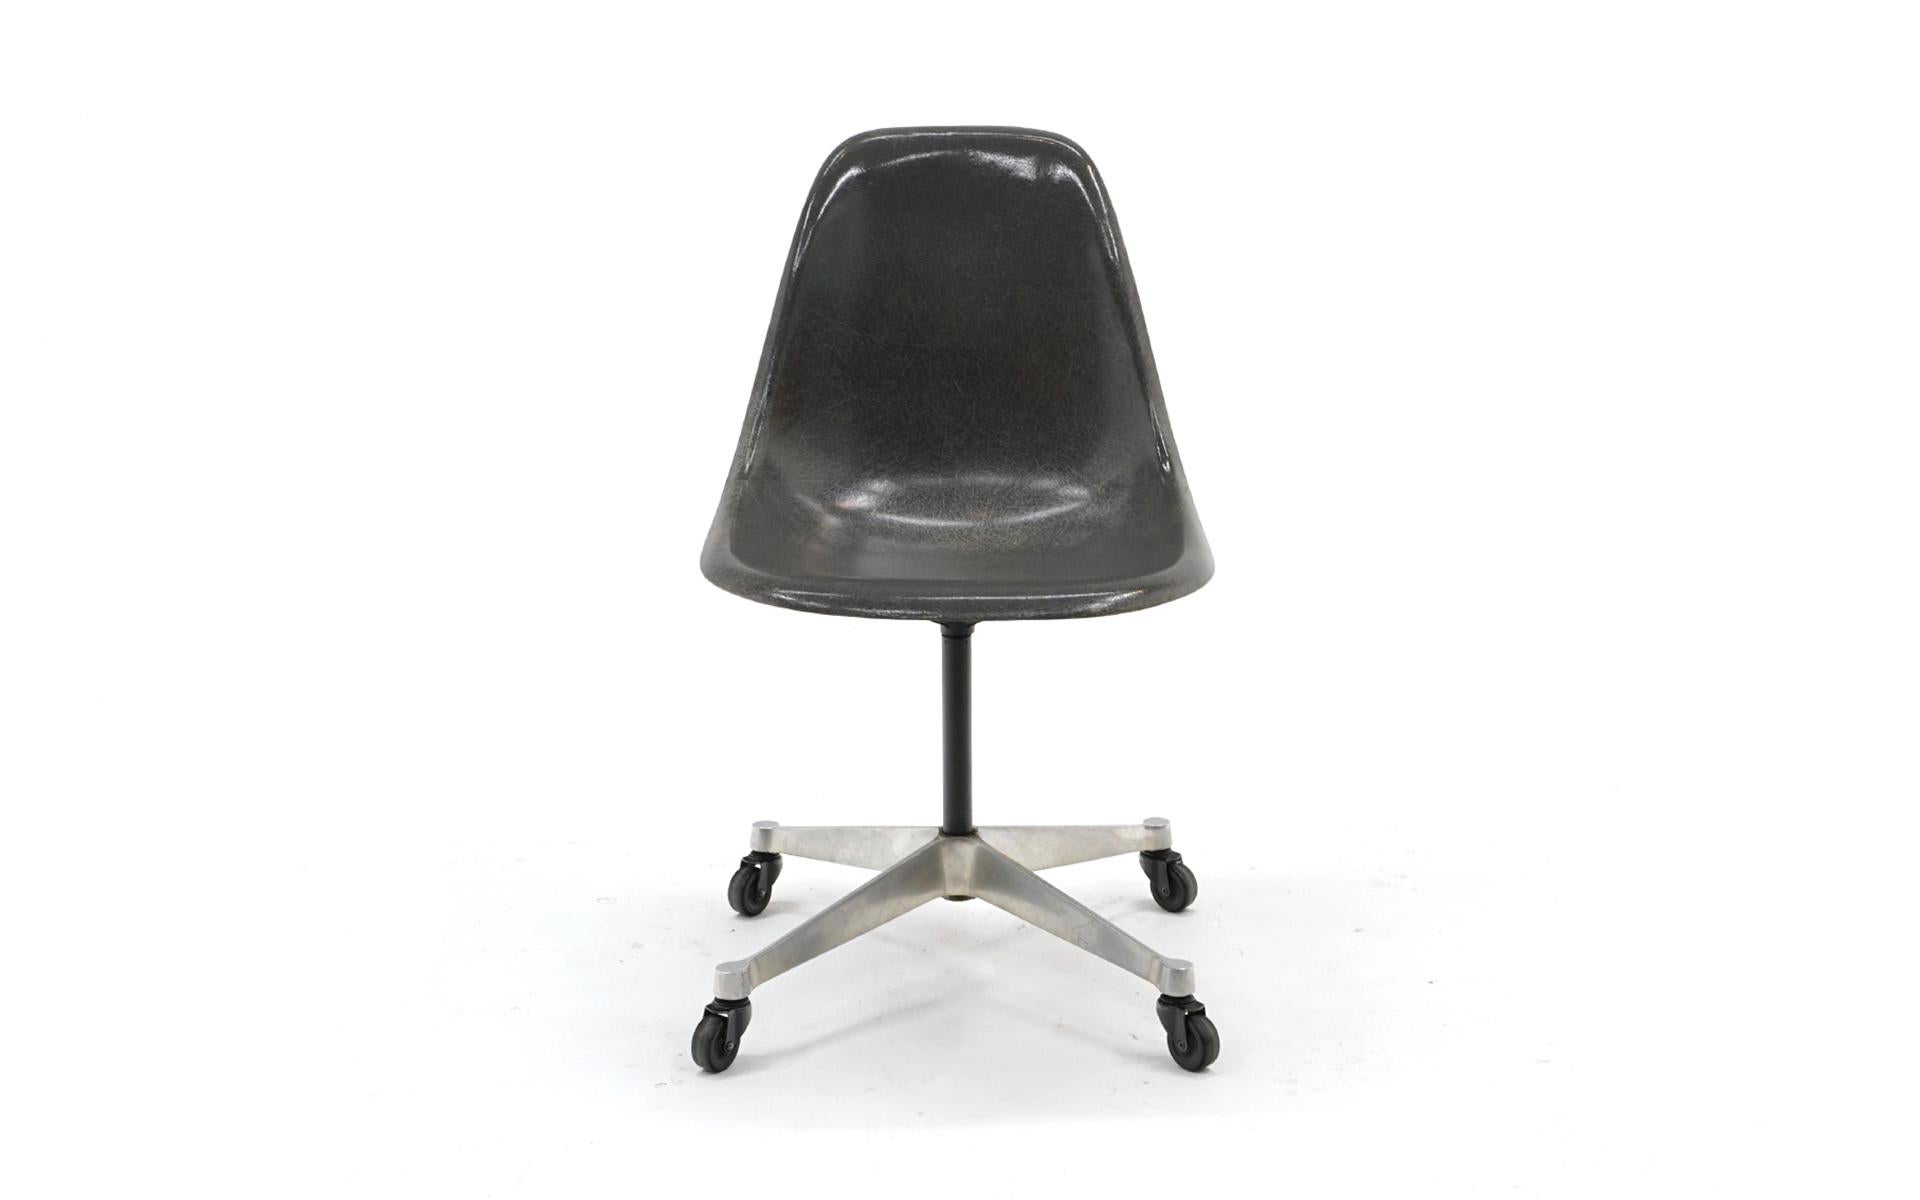 Early Charles and Ray Eames armless desk chair on aluminum group base with castes. Completely original and in very good condition. Made by Herman Miller.